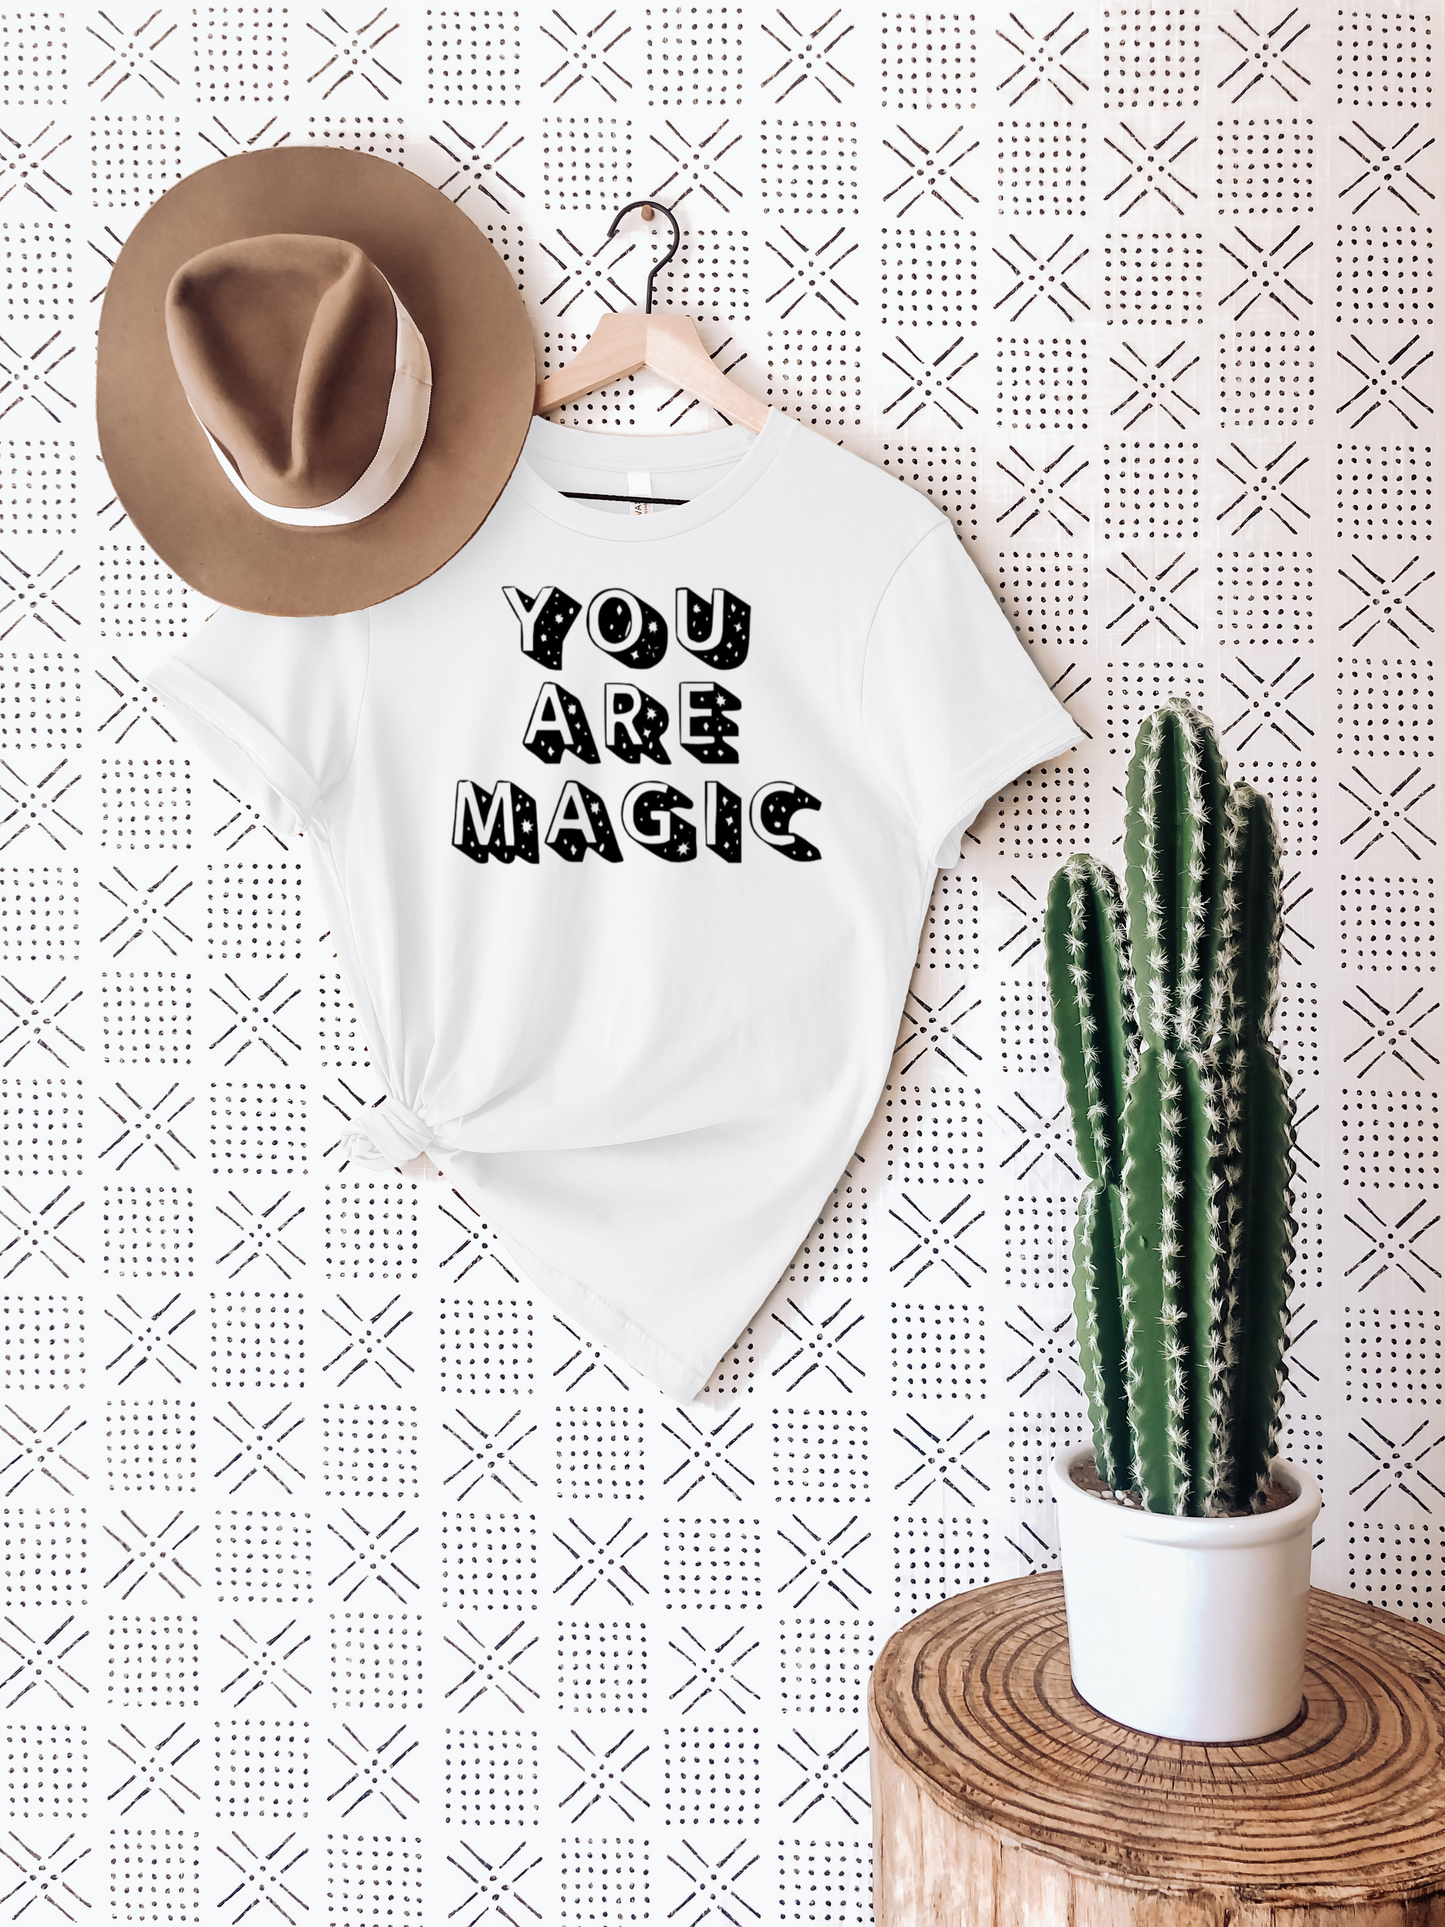 You Are Magic T-Shirt